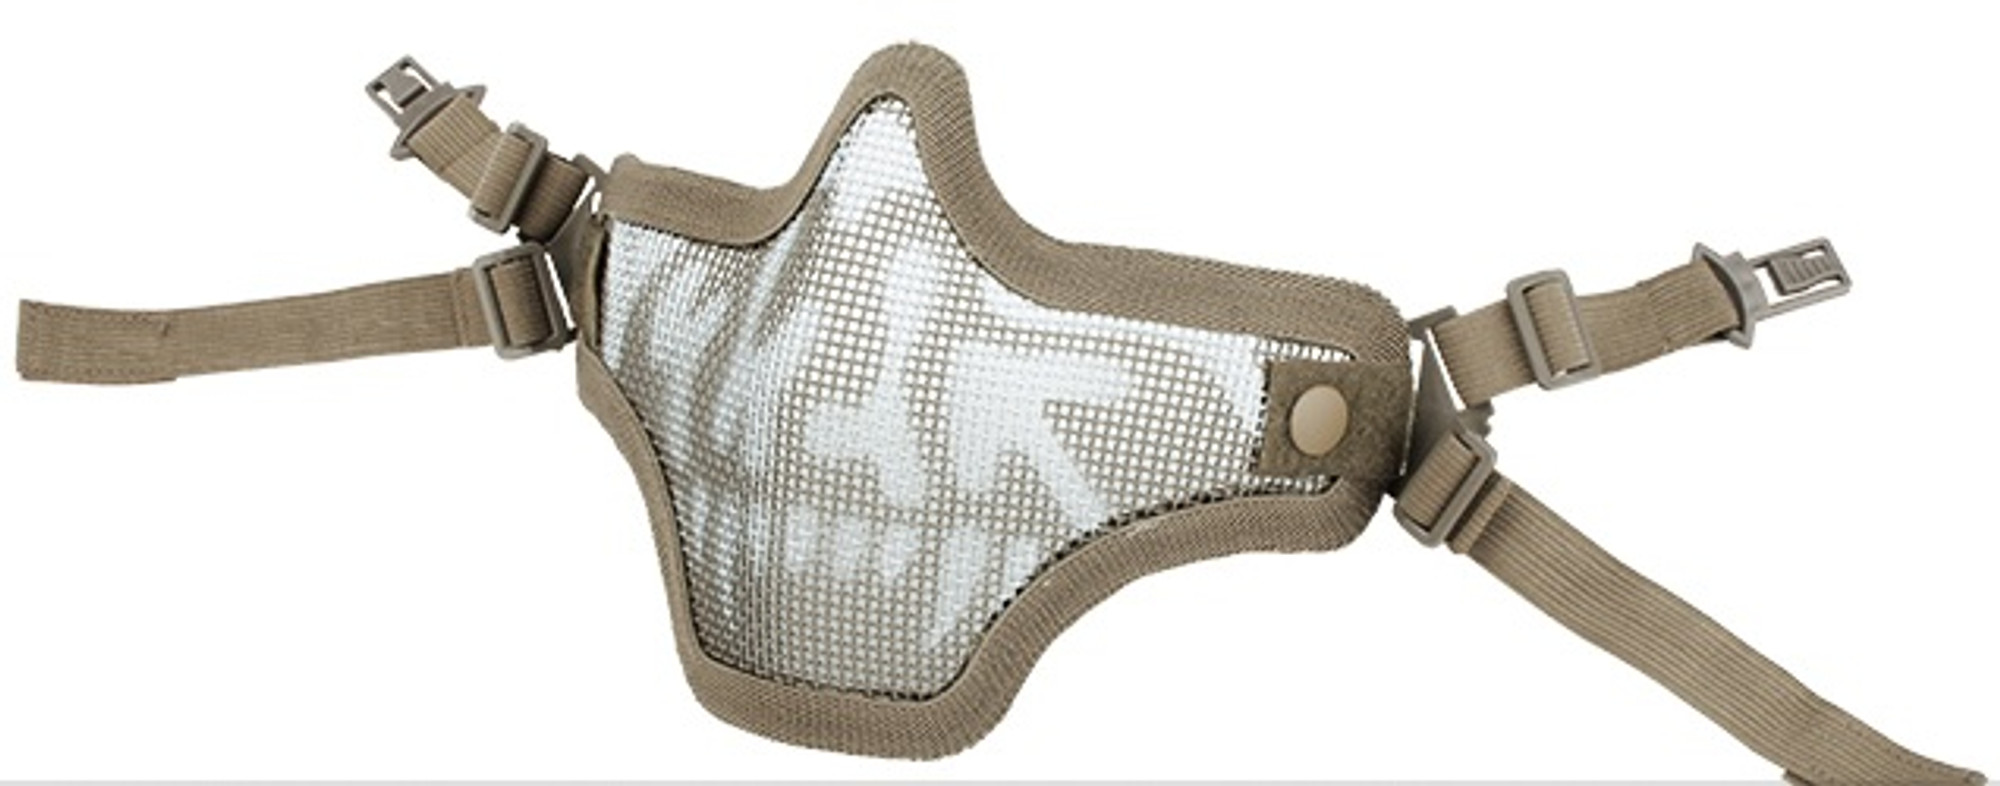 6mmProShop Iron Steel Mesh "Striker V1" Lower Half Mask for Use with Bump Helmets  -  OD Green with Skull